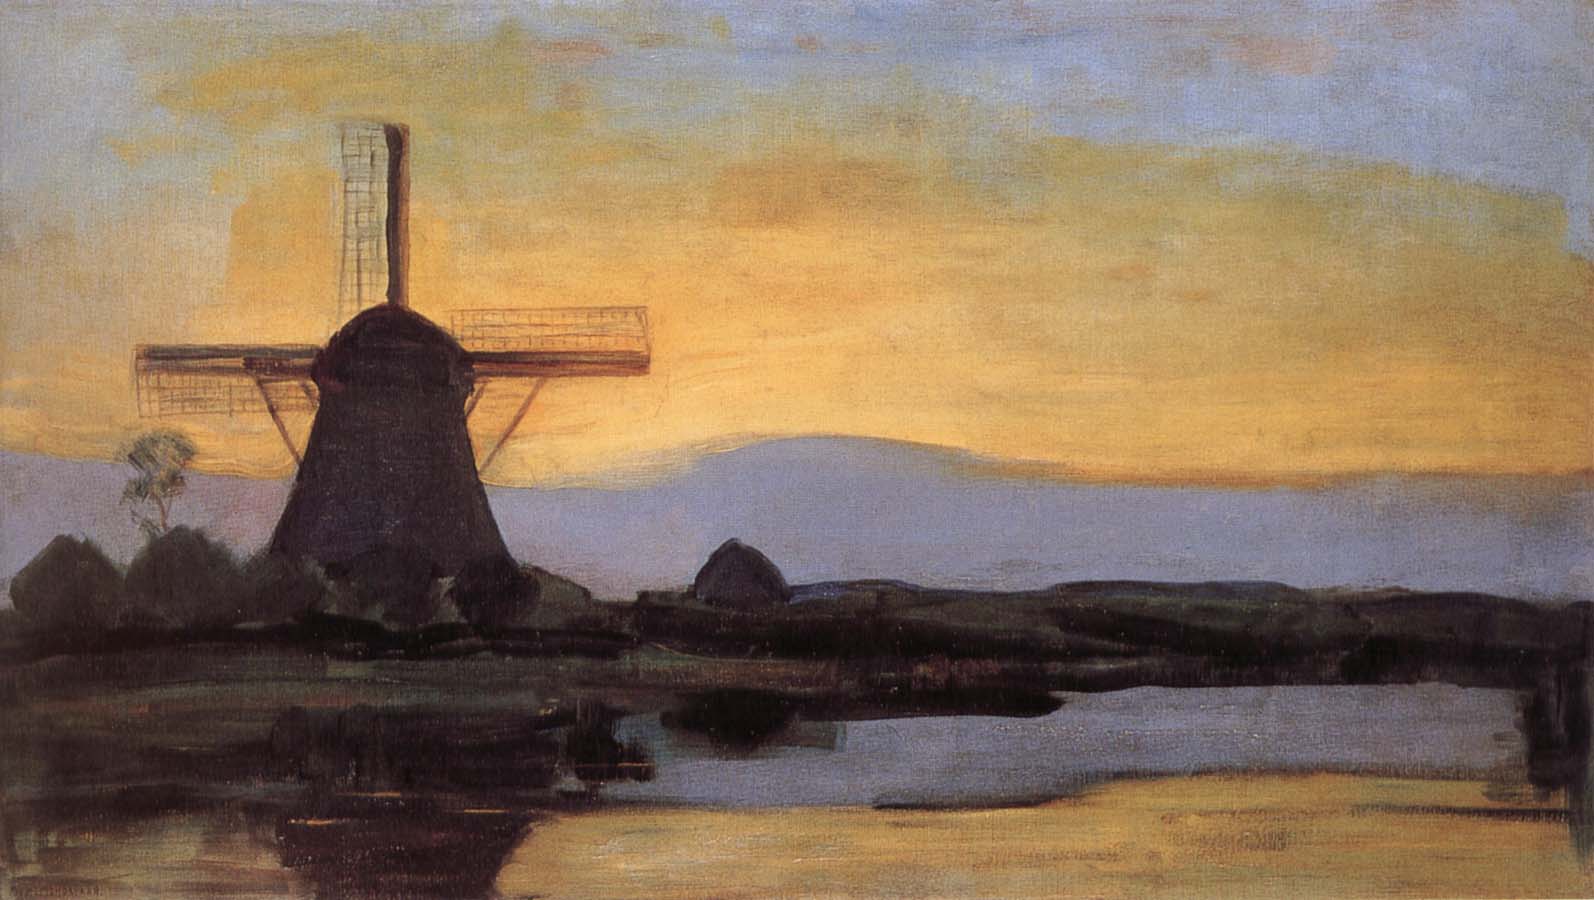 The mill at night